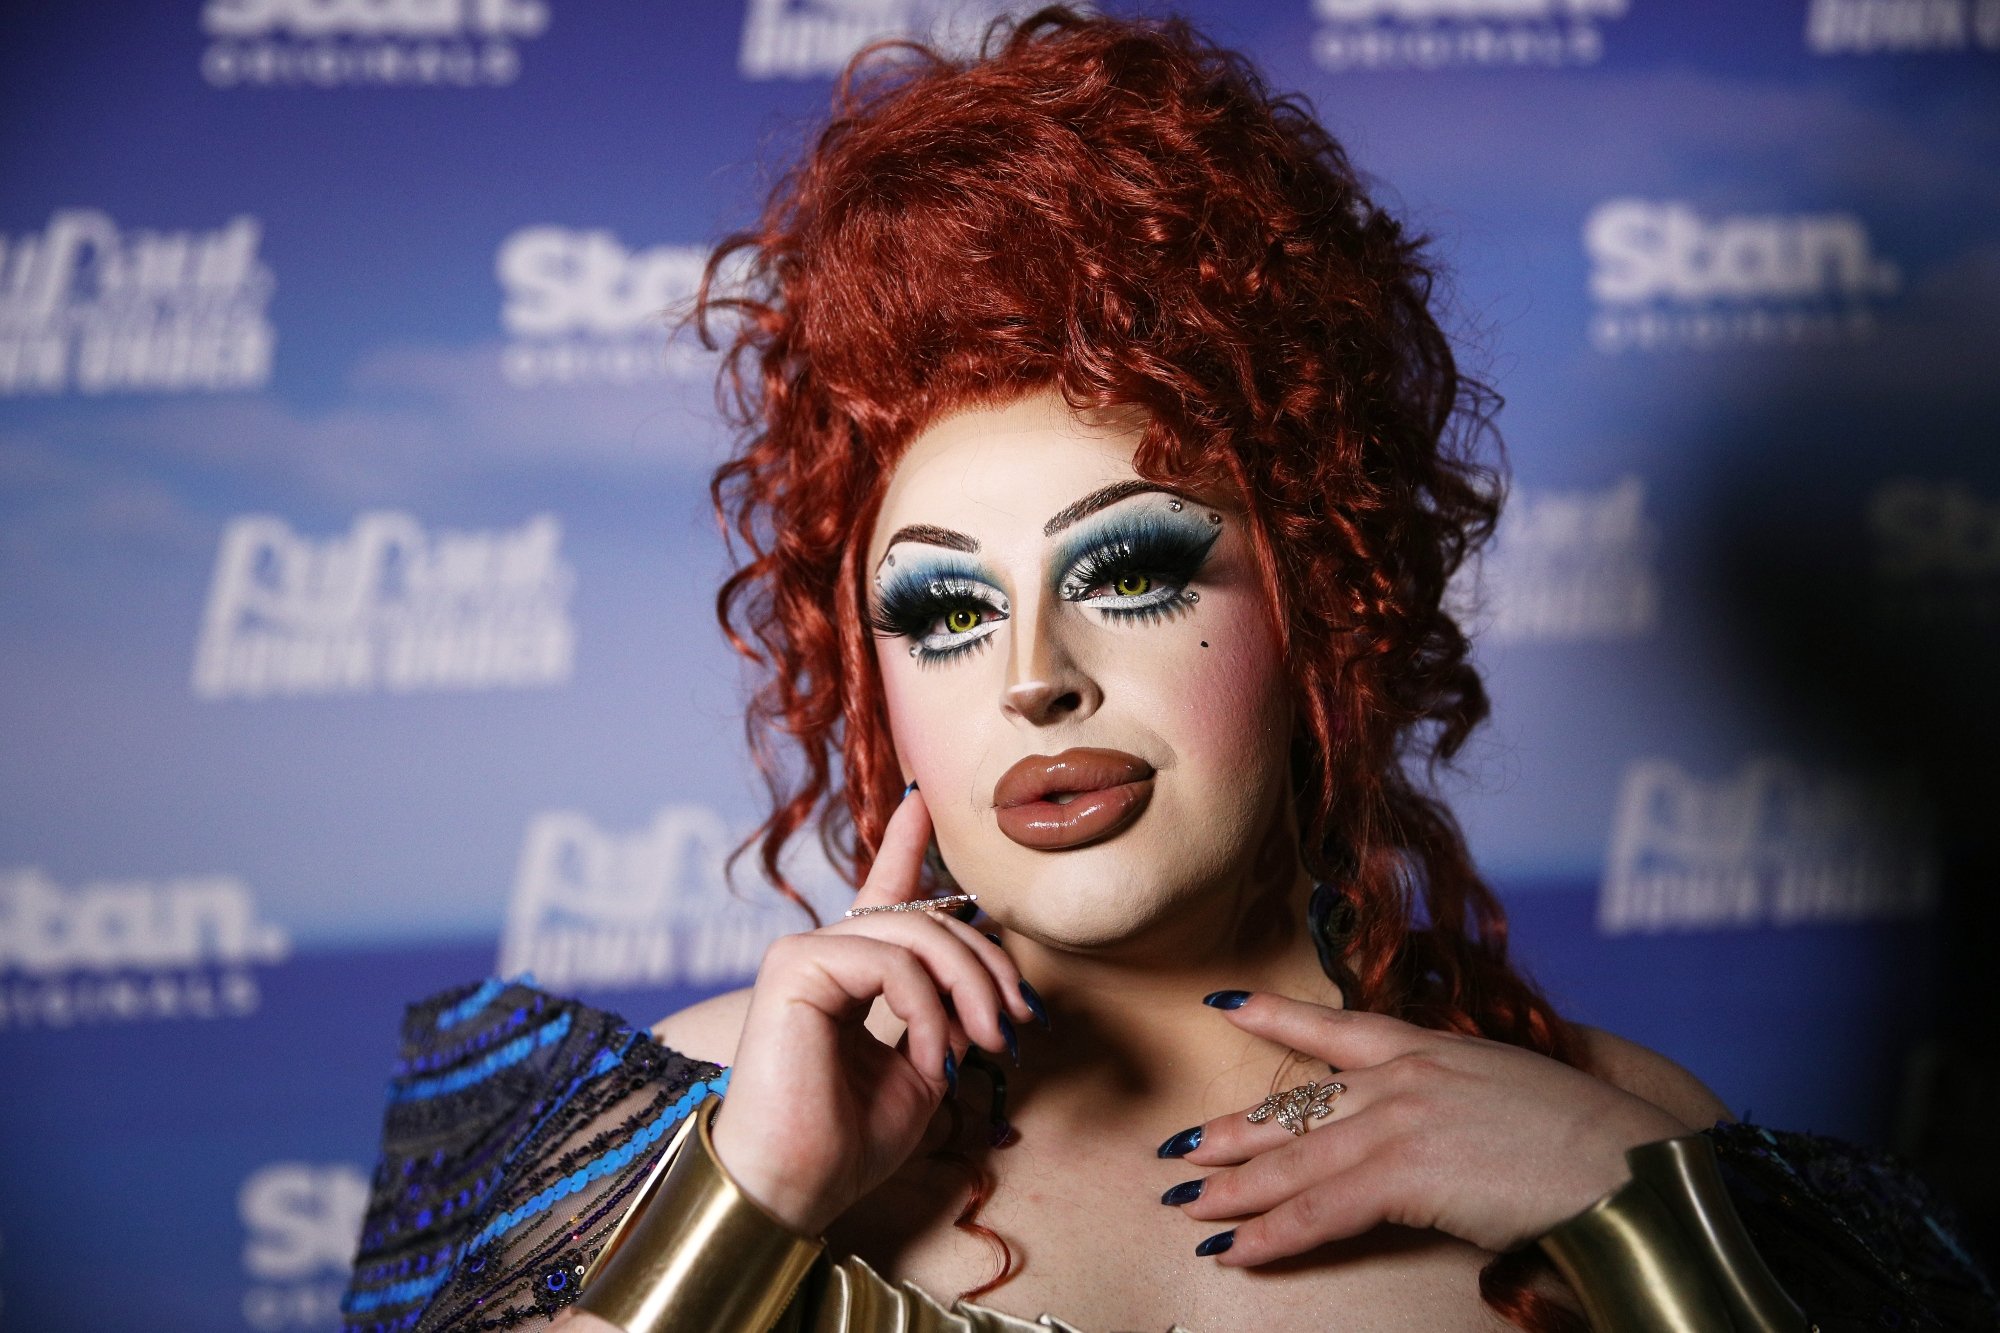 'RuPaul's Drag Race Down Under' Season 2 Hannah Conda posing with one hand near her neck and the other resting on her cheek. She's wearing red hair in front of a 'Drag Race' step and repeat.